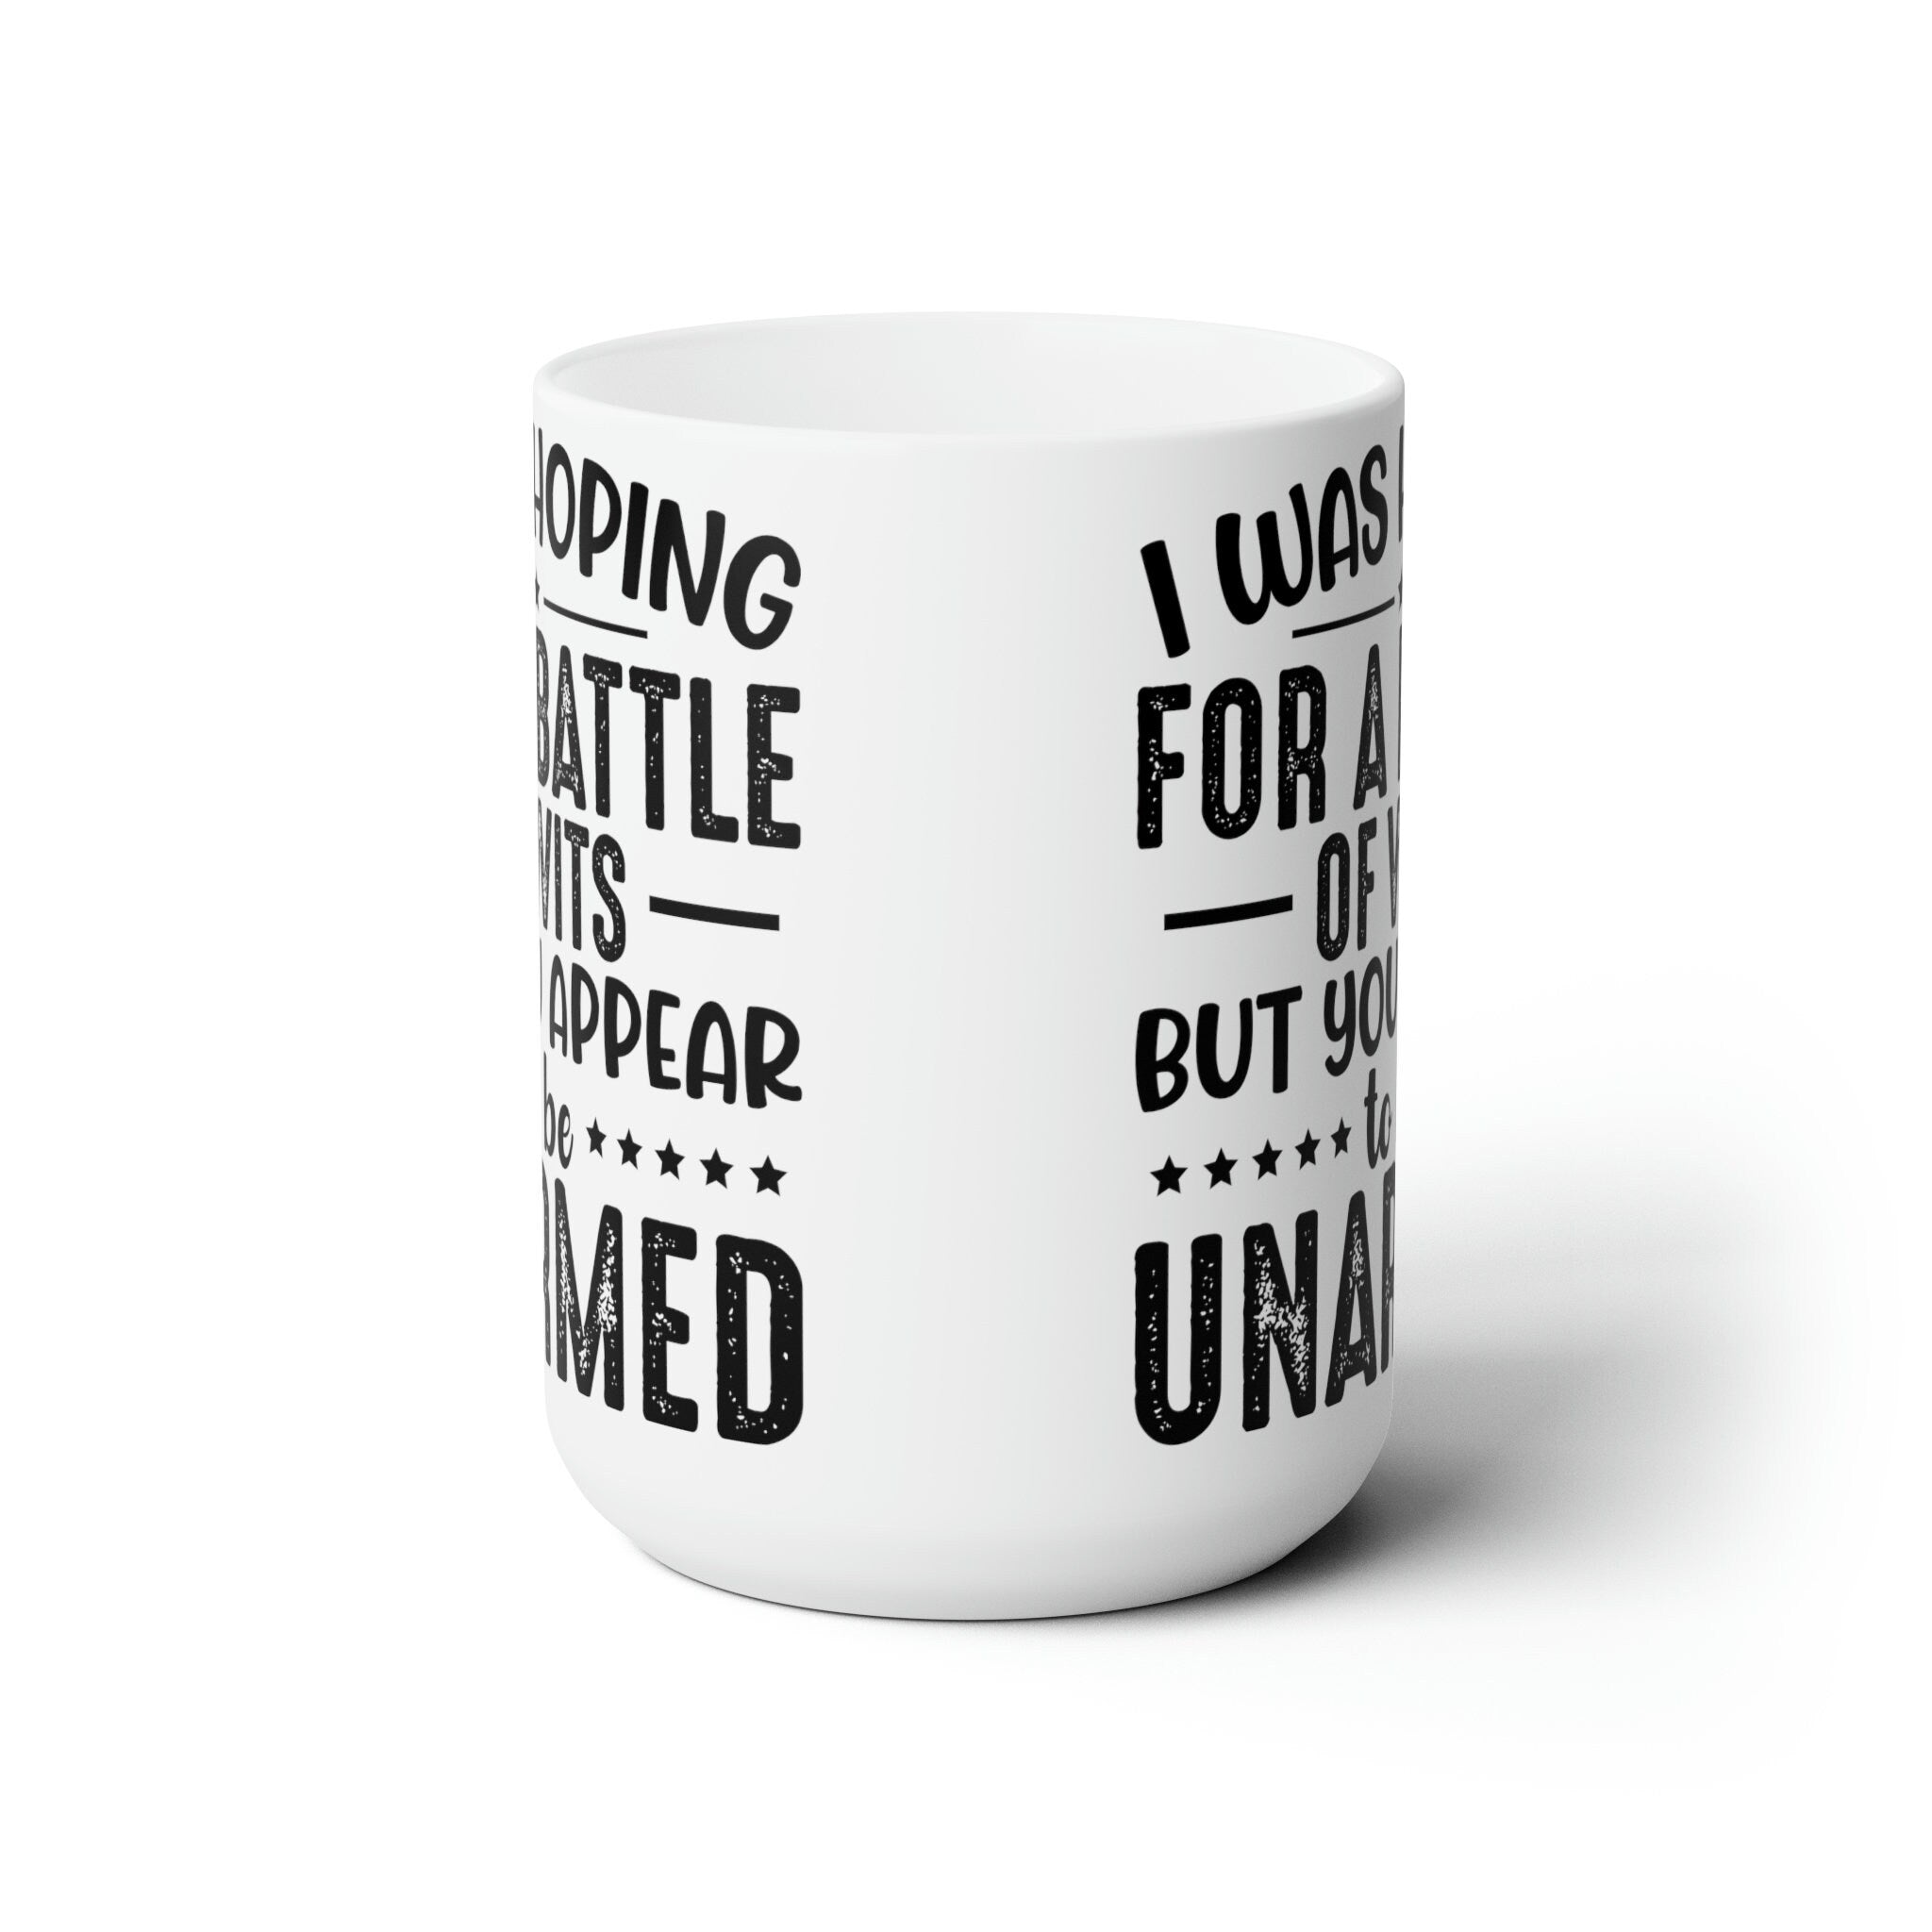 Battle of Wits and You Appear To Be Unarmed..White Ceramic Mug 15oz Perfect Gift